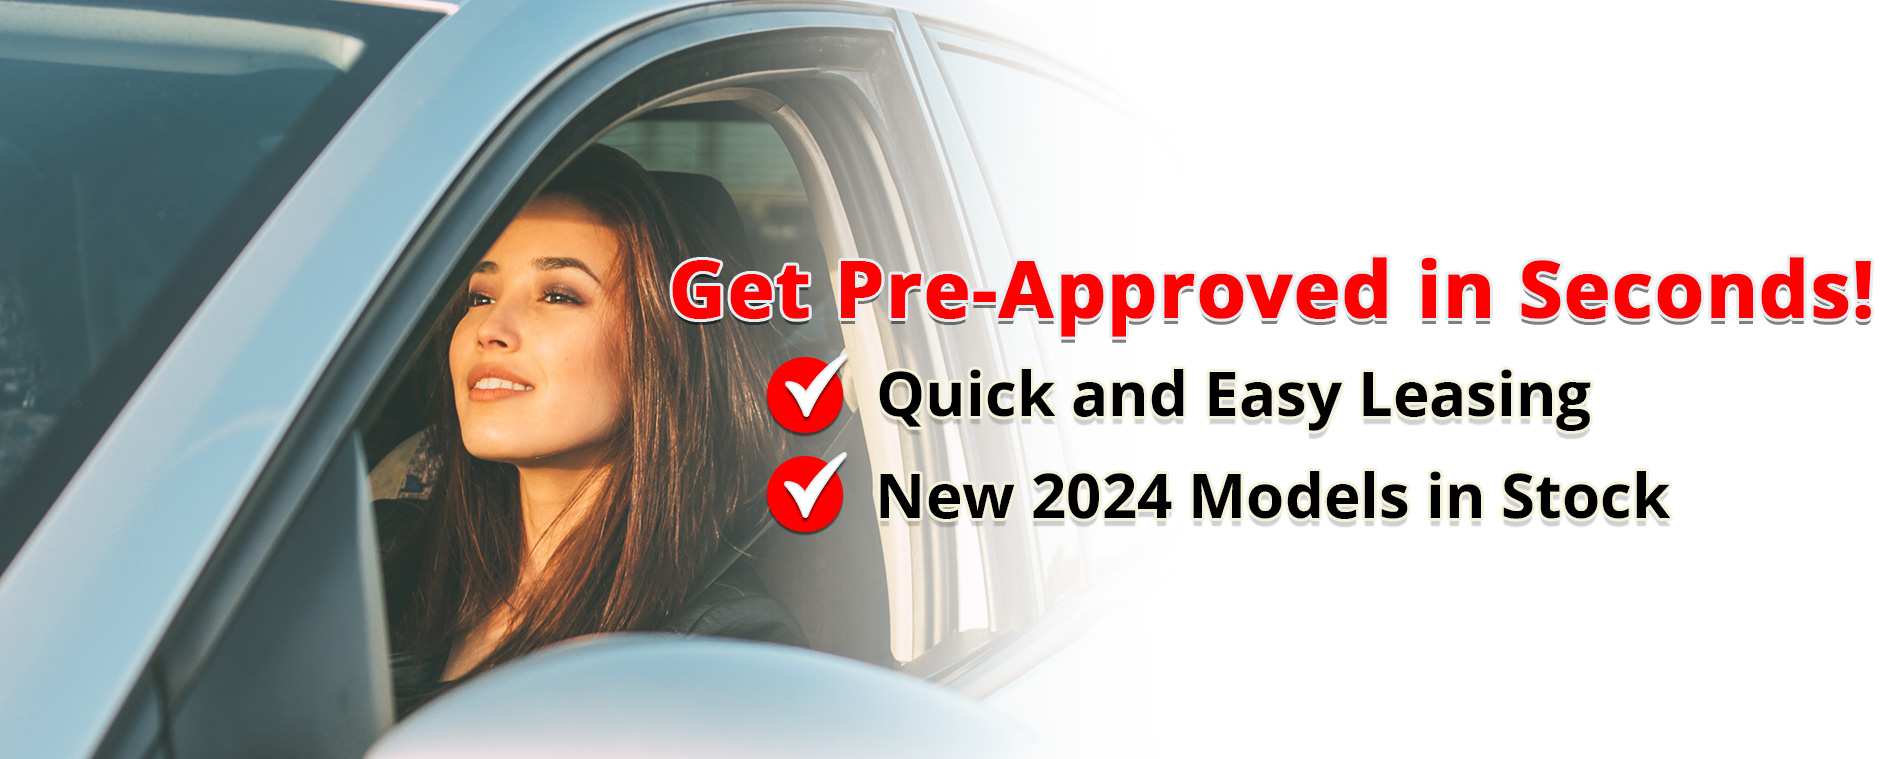 Get pre-approved